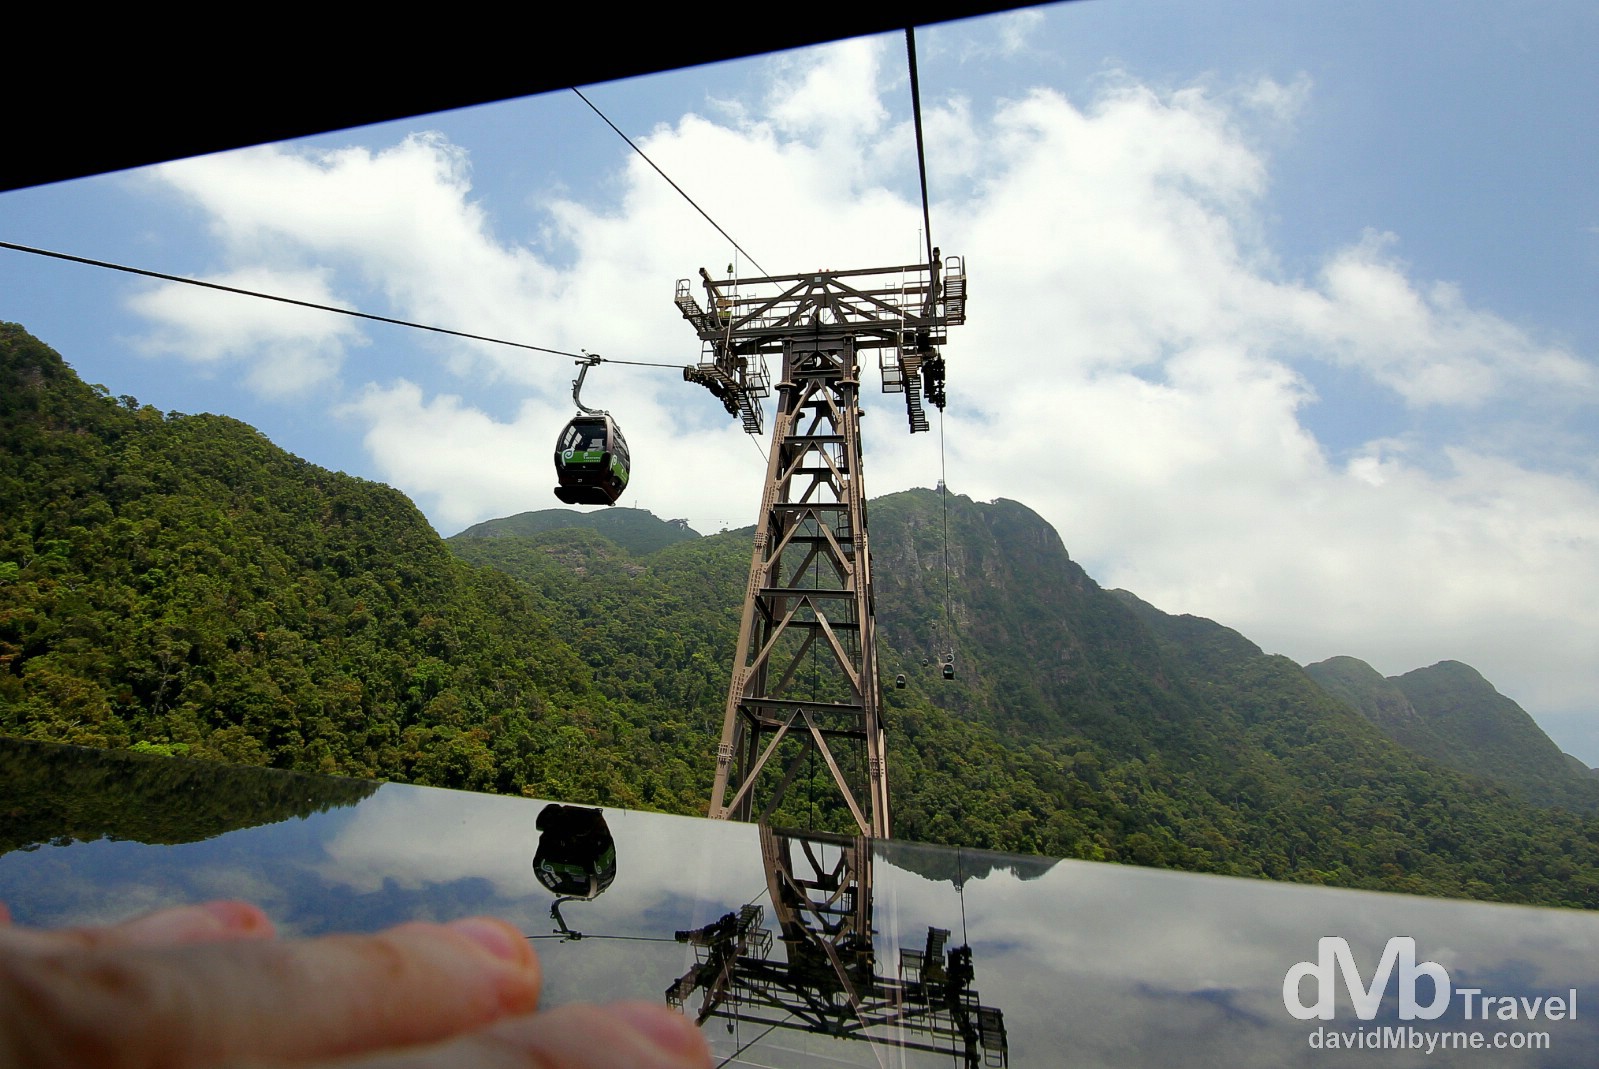 This is a picture taken through a narrow cap in a window of the Langkawi Cable Car, the most popular tourist attraction on the island. I was ascending when I took this & needed to keep the spring-mounted window open with my left hand (bottom left) while holding the camera with my right. I’m a sucker for reflections so of course I particularly like the reflections seen here; I feel they detract from the poor mountain visibility caused by low-lying haze emanating from, I assume, the jungle floor below. In the distance, beyond the mammoth 70m-high Tower 2 as seen here, is the longest free span section of the whole 2.2km cable car ride, the 950m stretch between the tower up to the Middle Station. Gunung Machinchang, Langkawi Island, Malaysia. March 22nd 2012.